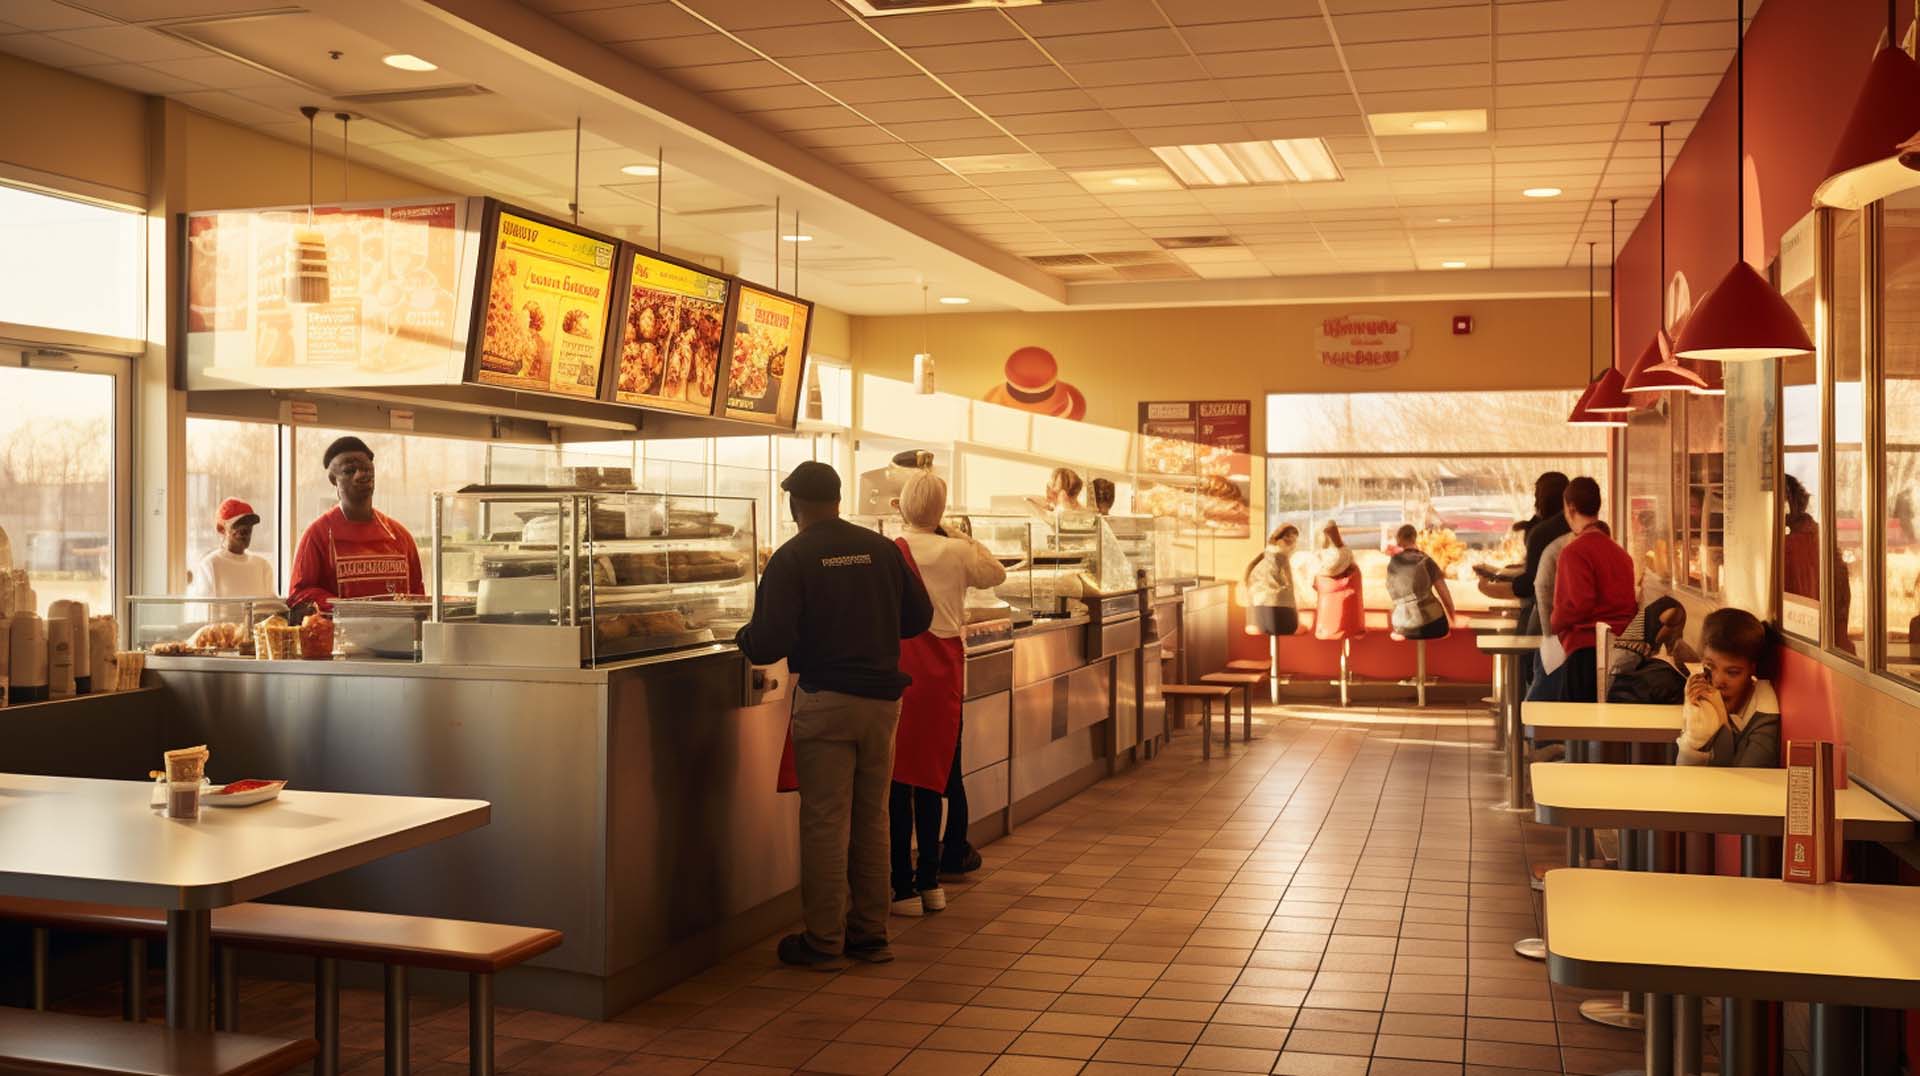 Los Angeles has a wide variety of delicious fast food options to choose from.